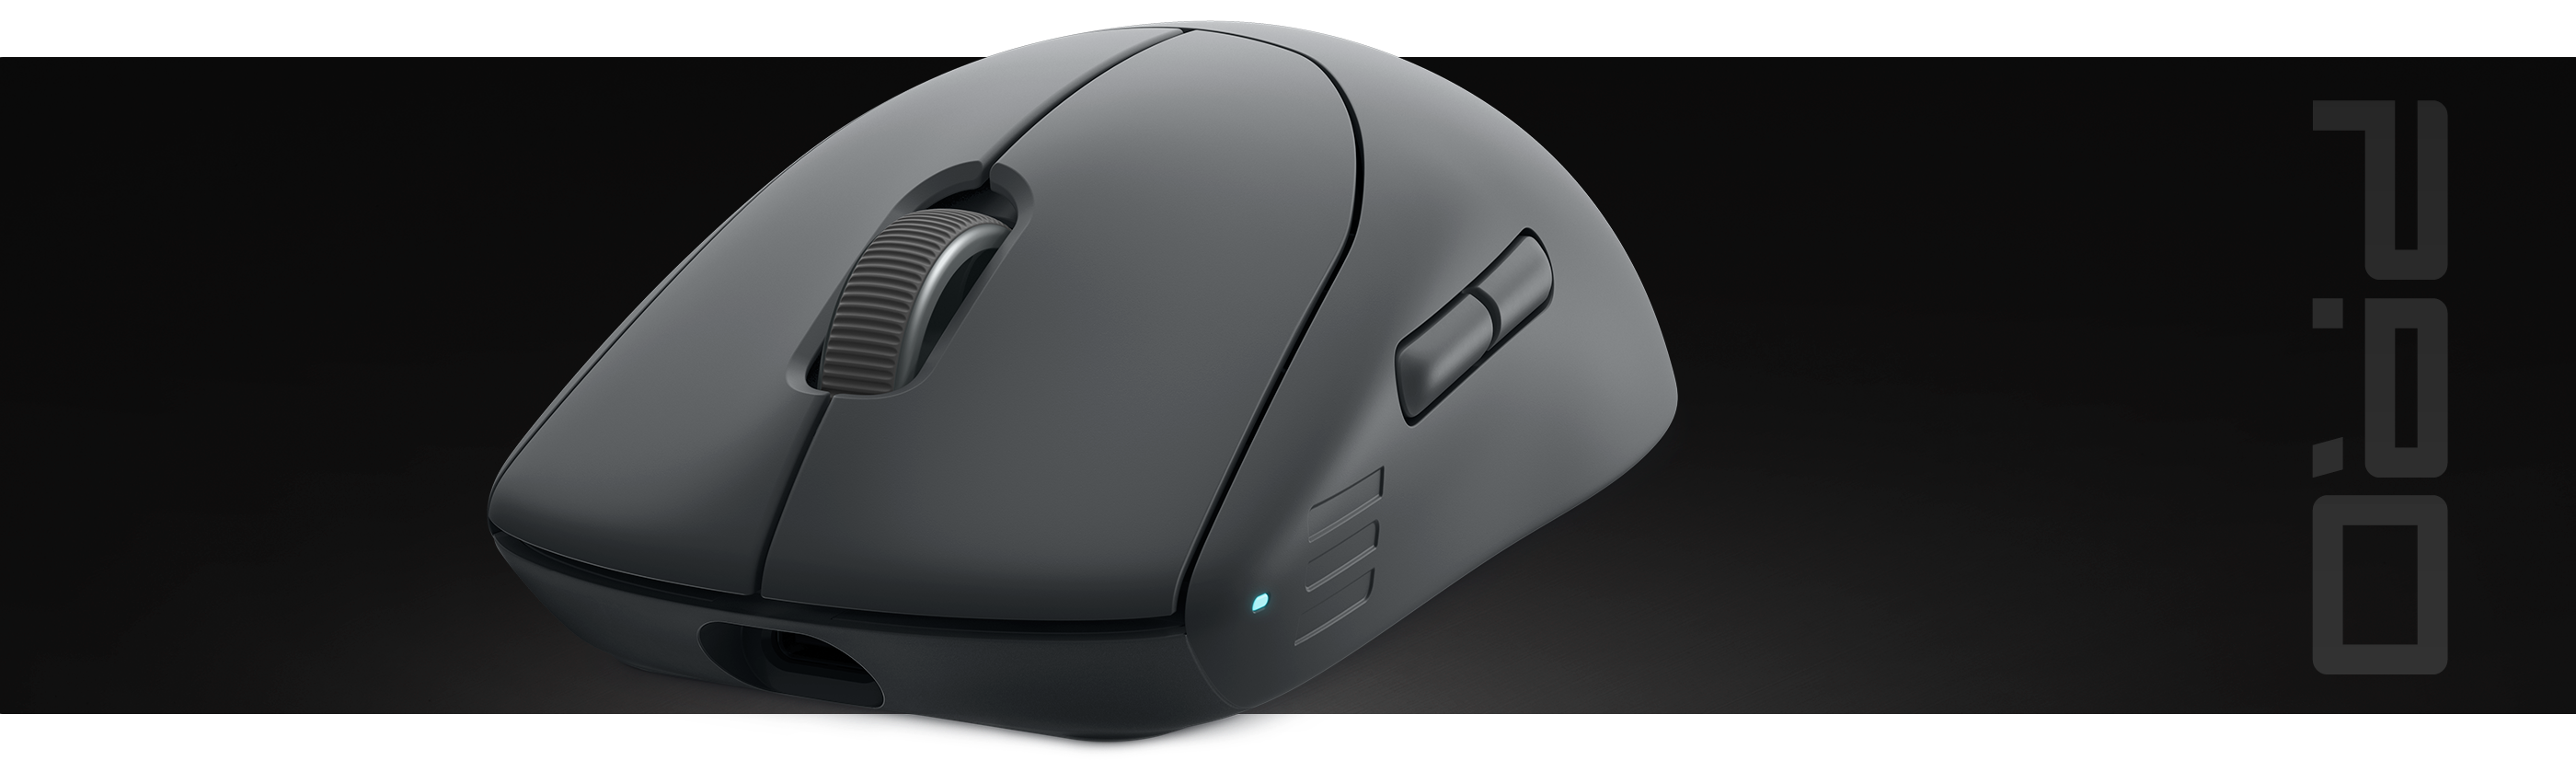 Dell Alienware Pro Wireless Gaming Mouse. 